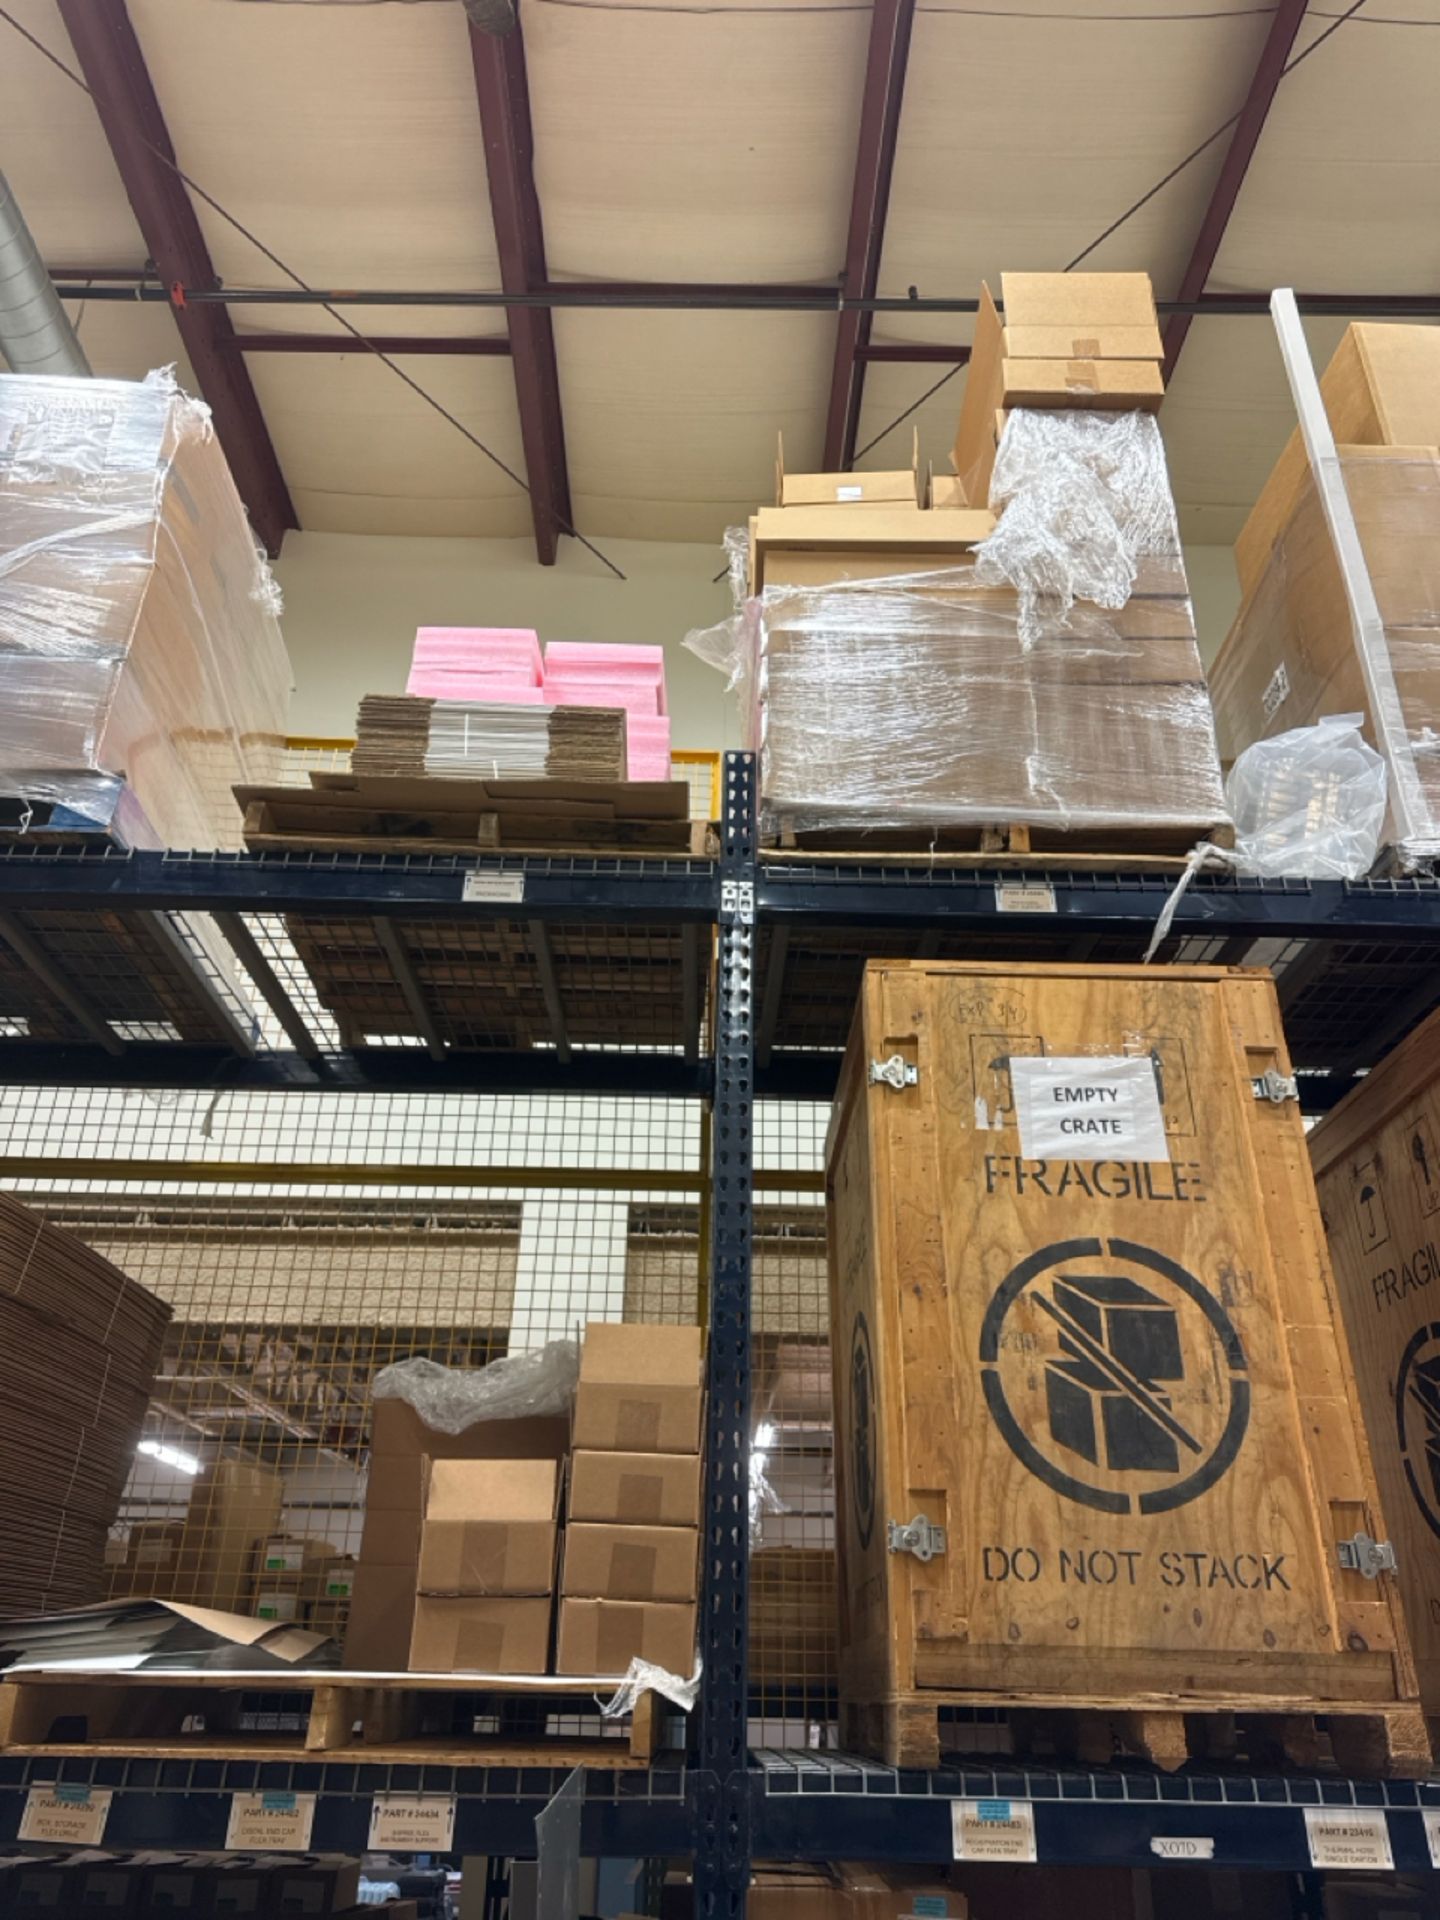 Contents of Center Pallet Racking - Image 62 of 68